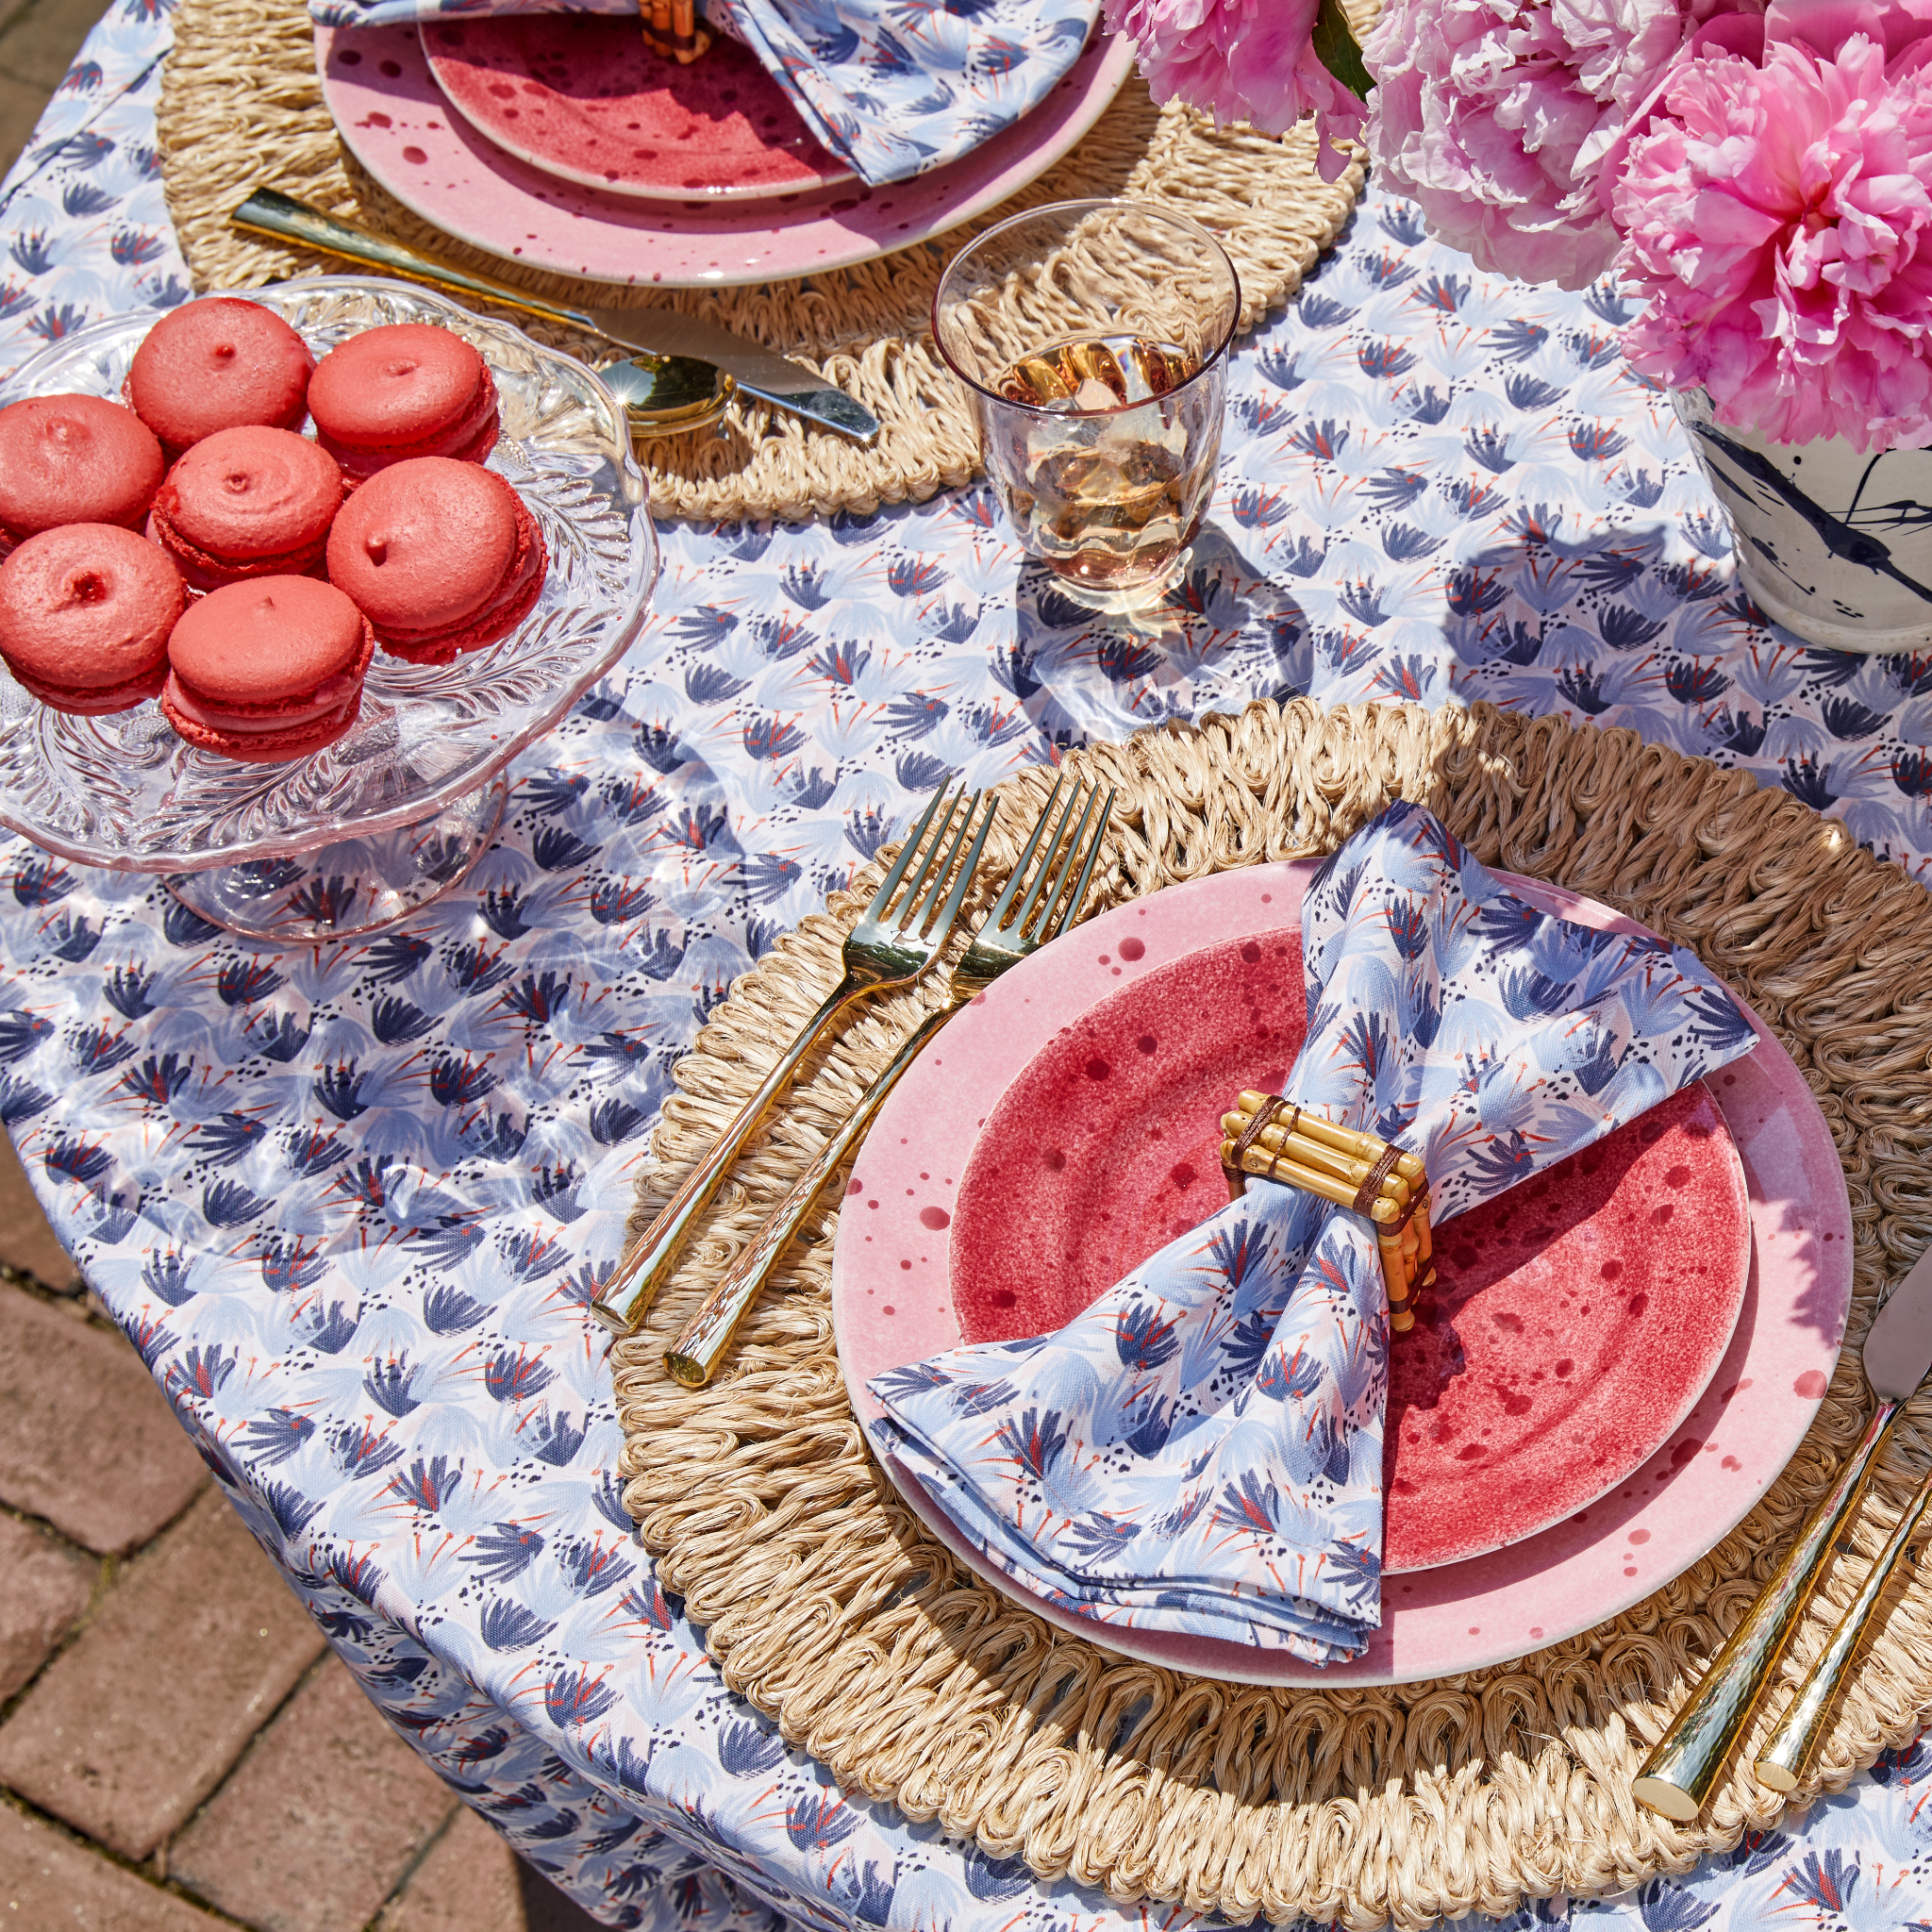 Sky Blue Pattern custom Tablecloth styled with gold silverware and red and blue custom napkins on top of red and pink plates by seven red macaroons on clear plate